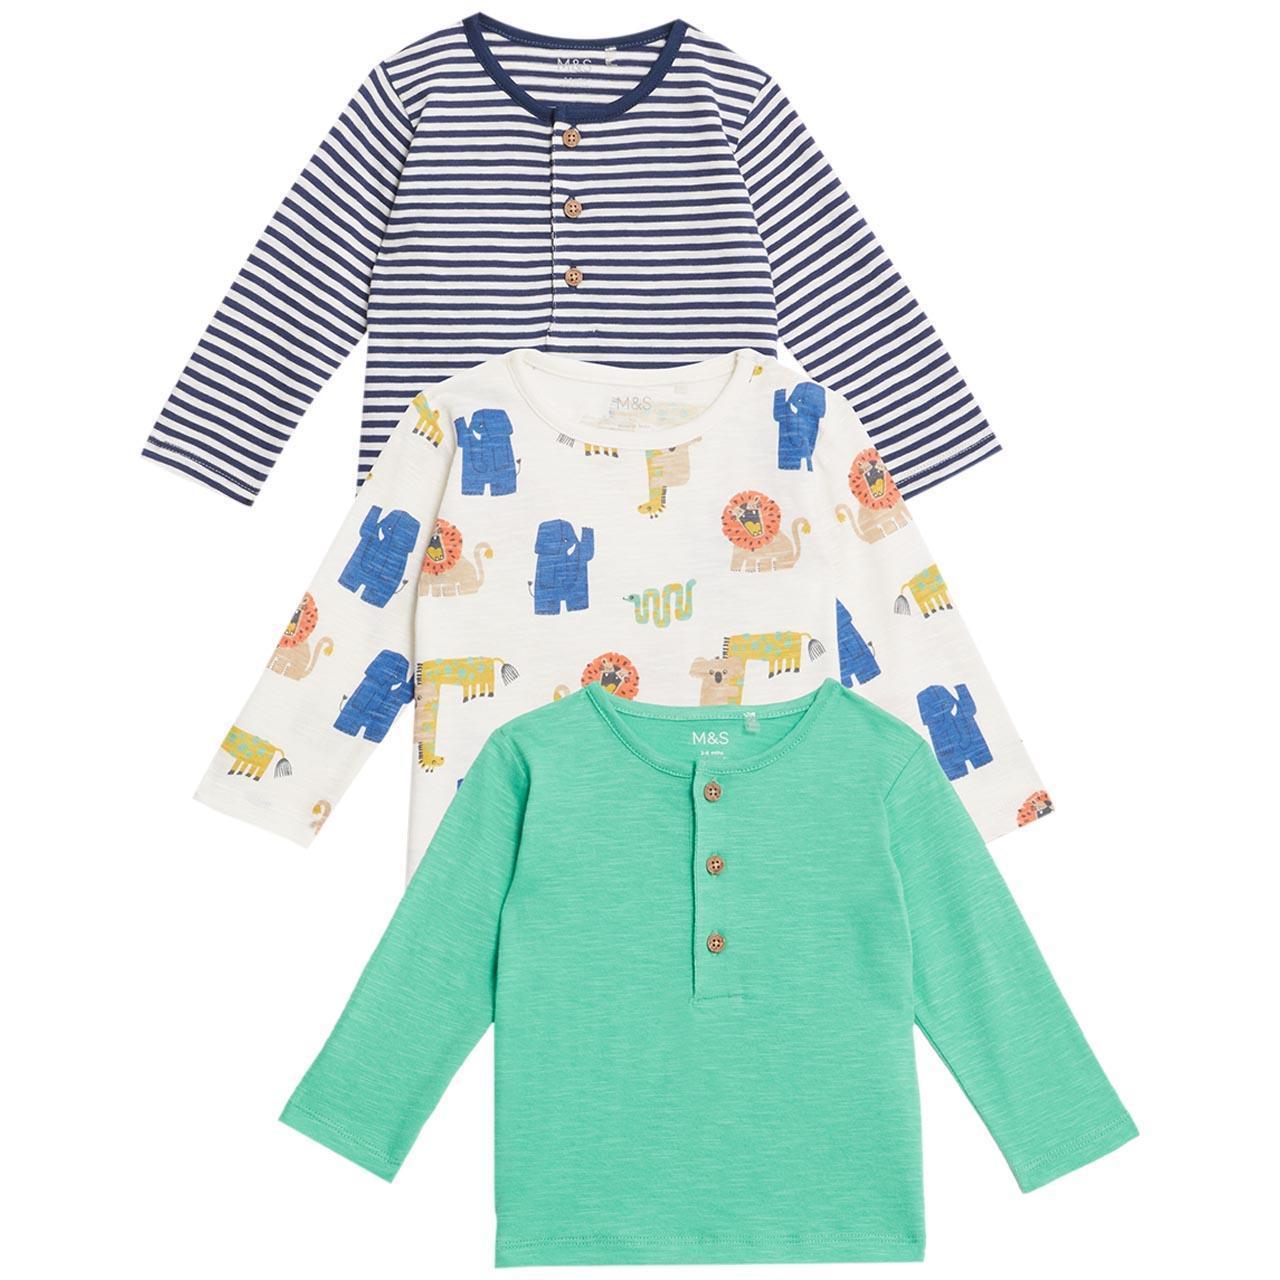 M&S Cotton Long Sleeve Tops 3 Pack, 0-3 Months, Multi